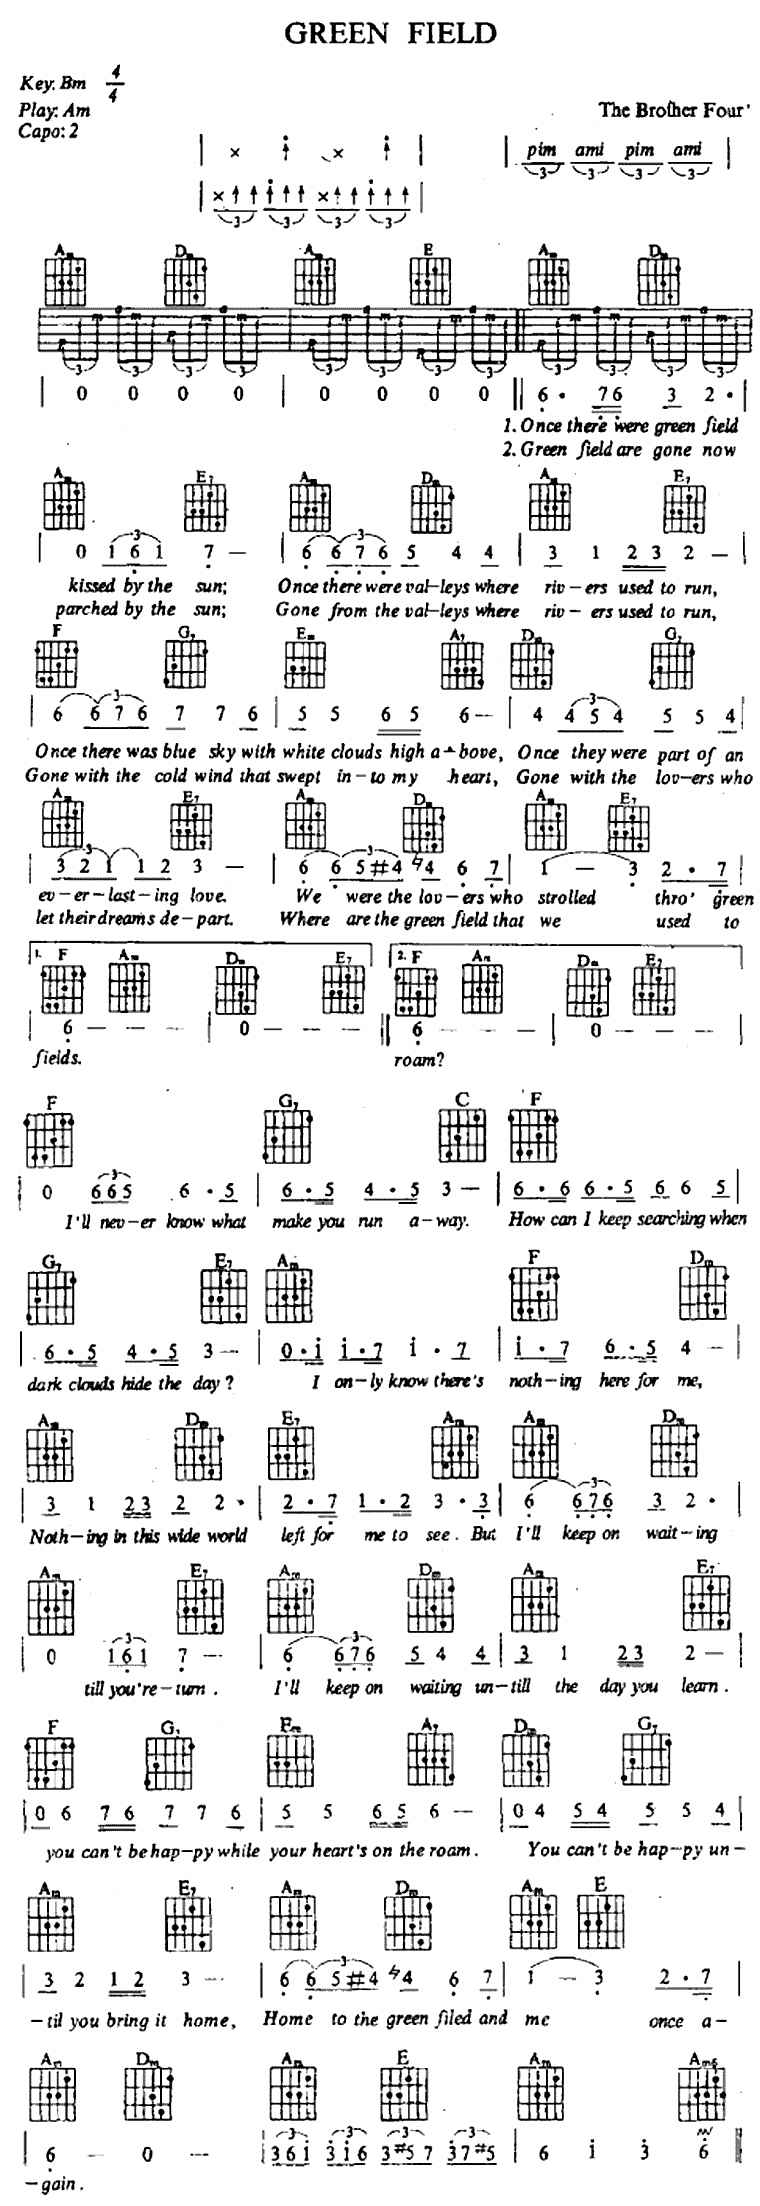 Green Field by The Brothers Four Guitar Sheet Music Free